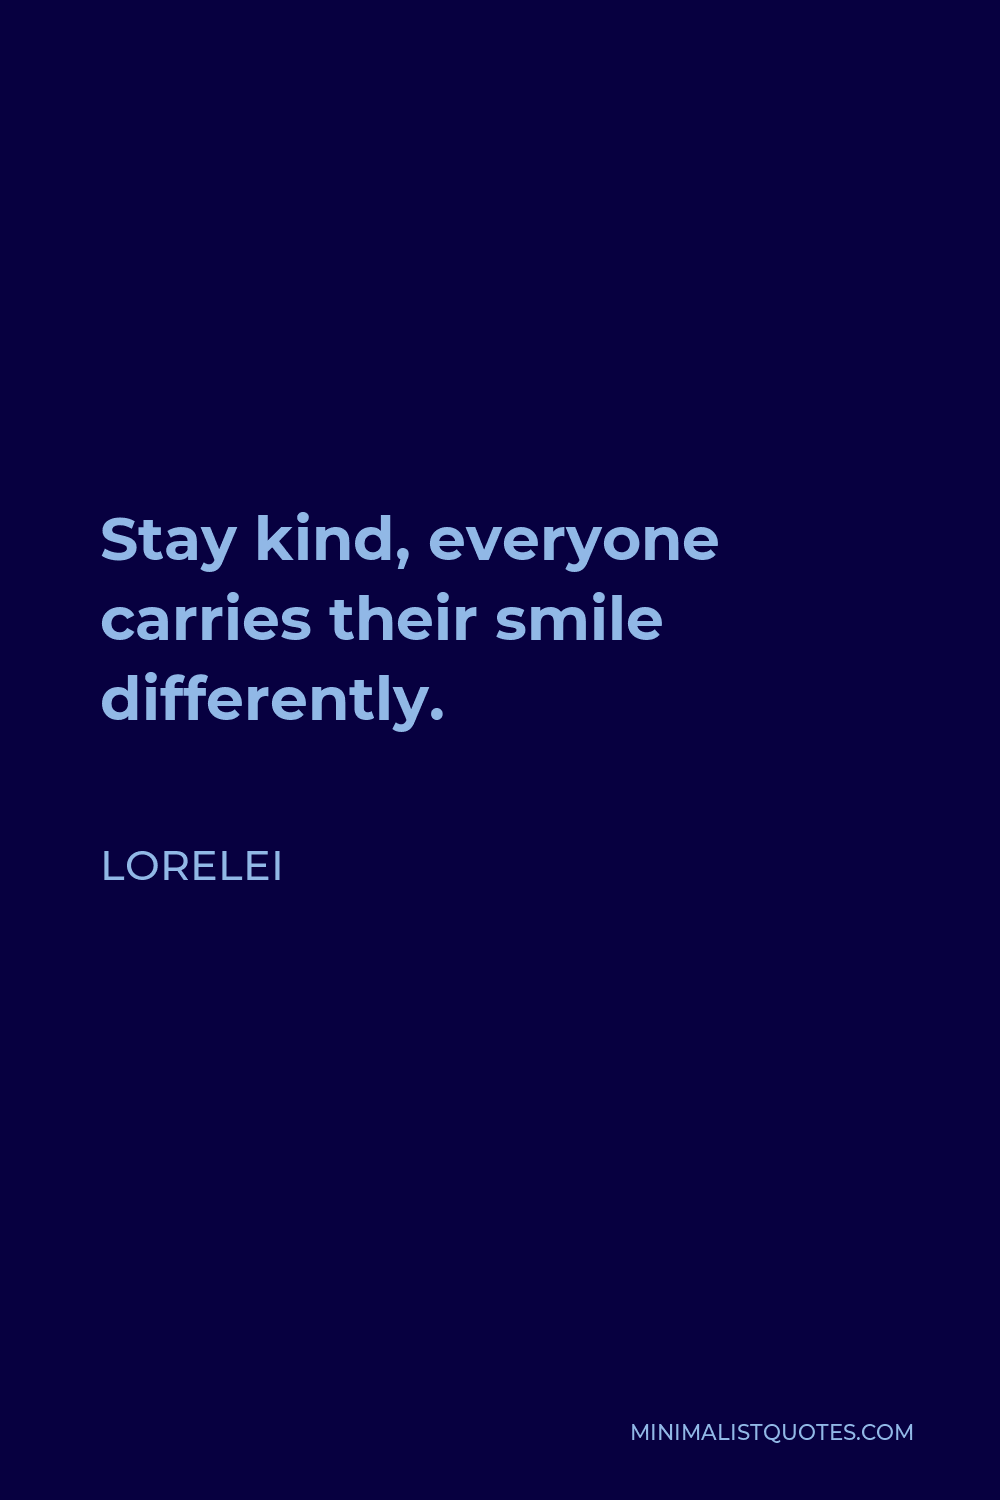 Lorelei Quote - Stay kind, everyone carries their smile differently.